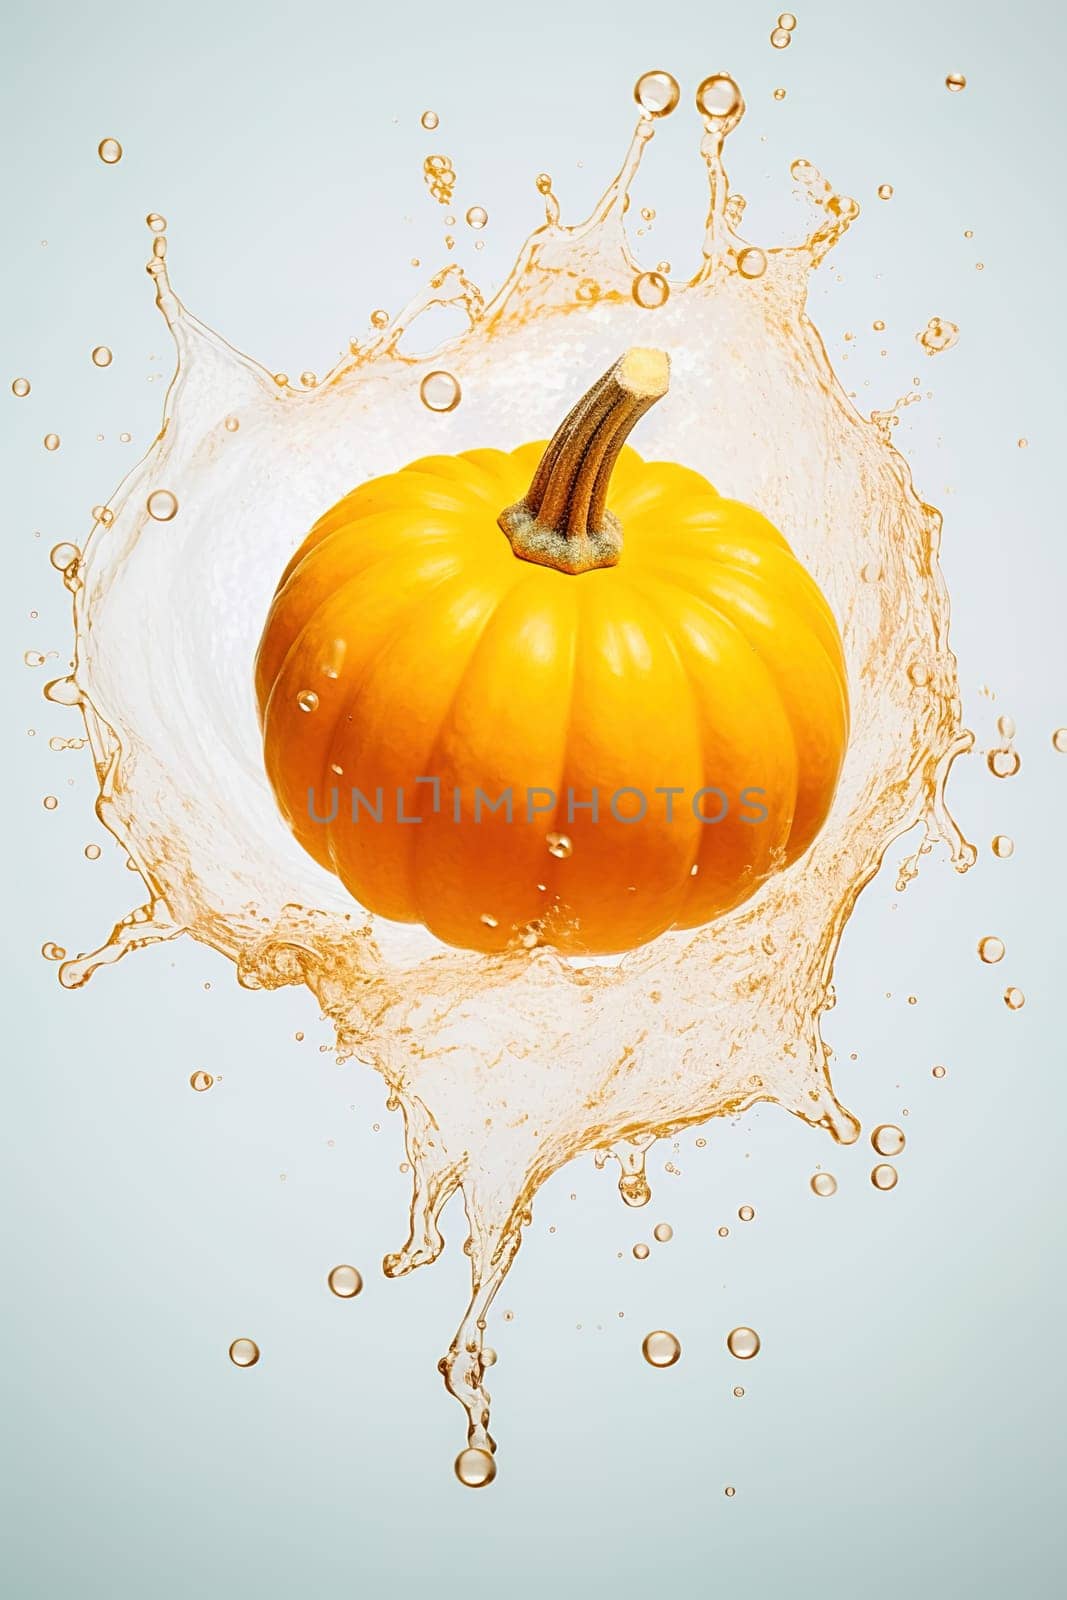 Pumpkin fruit with splashes of water on a blue background. by Yurich32